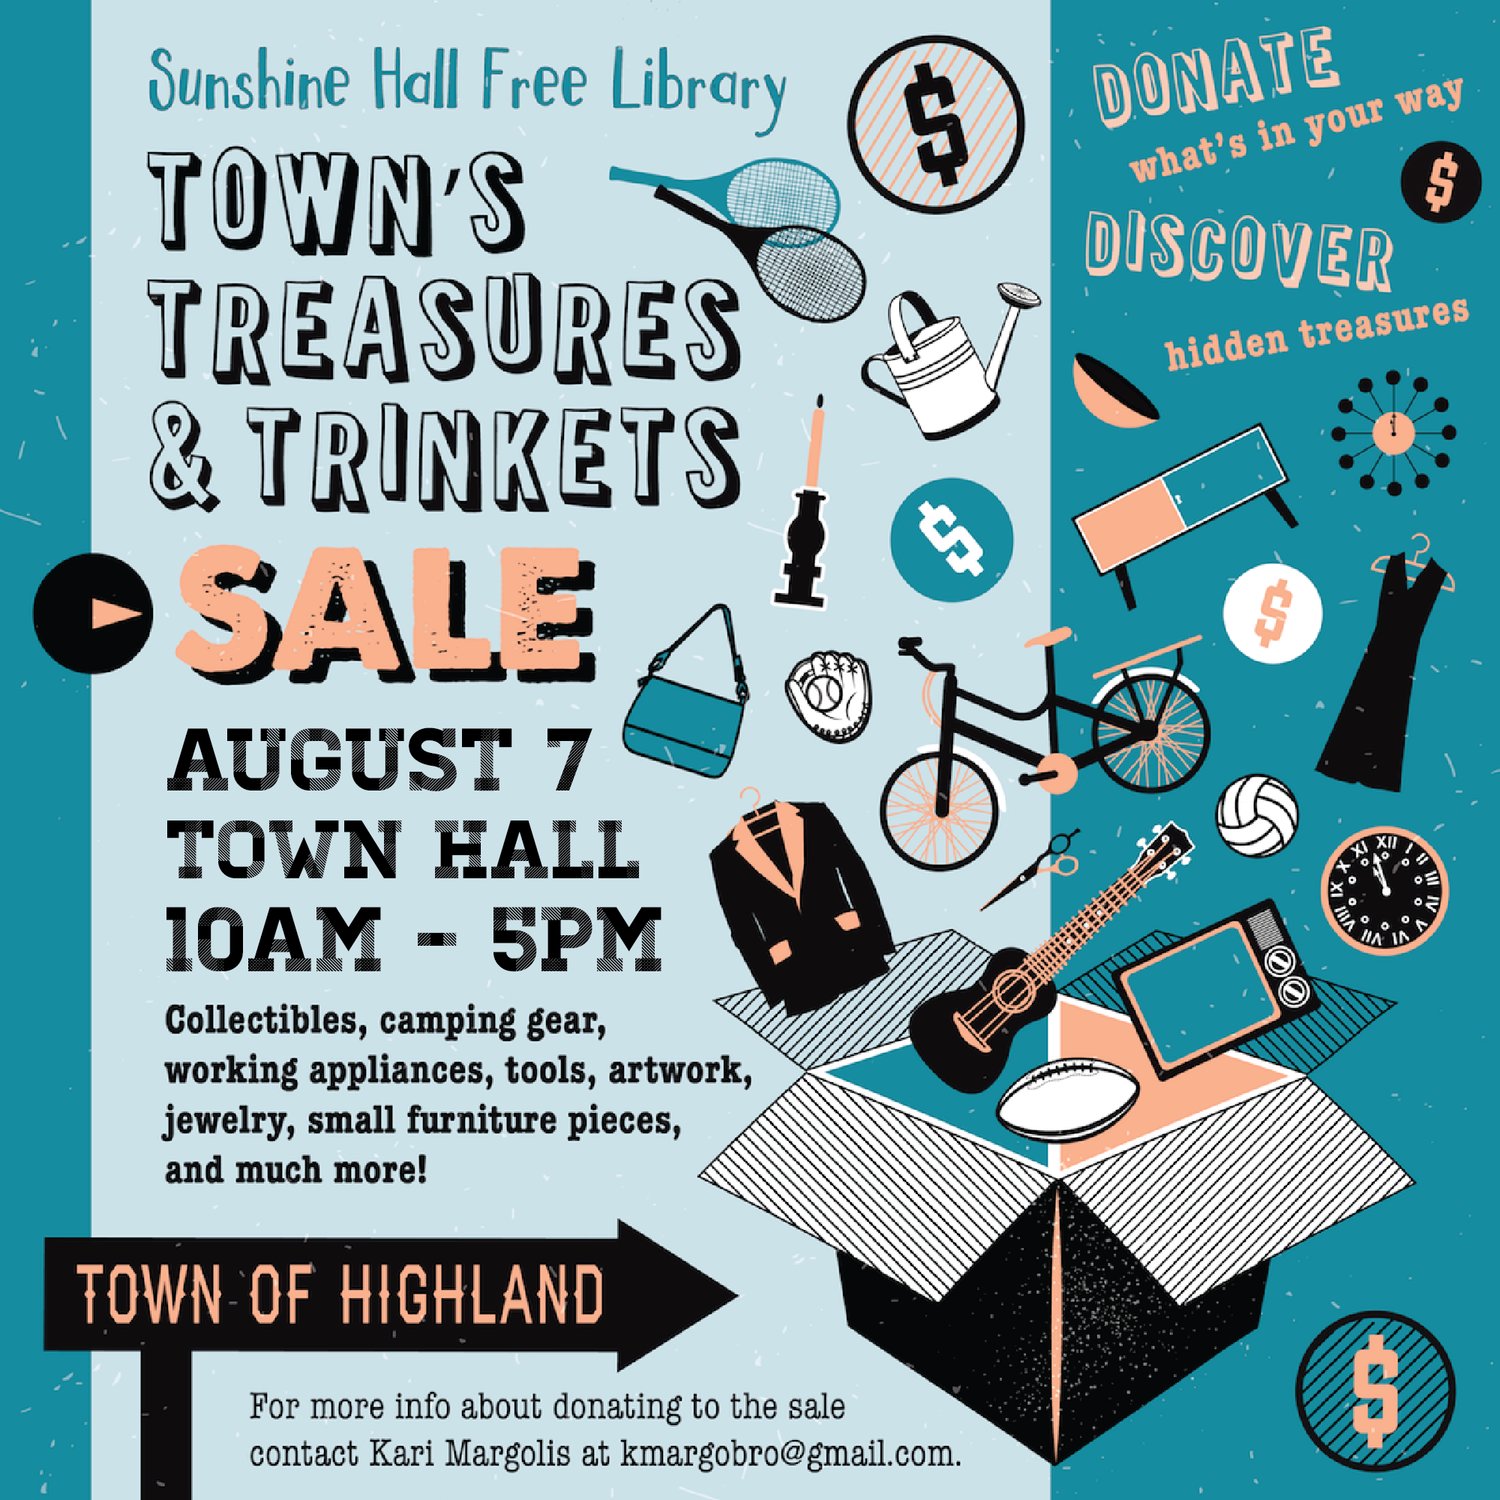 The Board of Trustees of the Sunshine Hall Free Library have gotten hundreds of donations for next Saturday’s Treasures and Trinkets Sale. Need top of the line power tools, a mountain bike, silverware or camping equipment at very reasonable prices? The Sale will be held at the Highland Town Hall followed by a event at the Shrewd Fox Brewery’s Beer Garden featuring live music by the River  Ramblers Band.